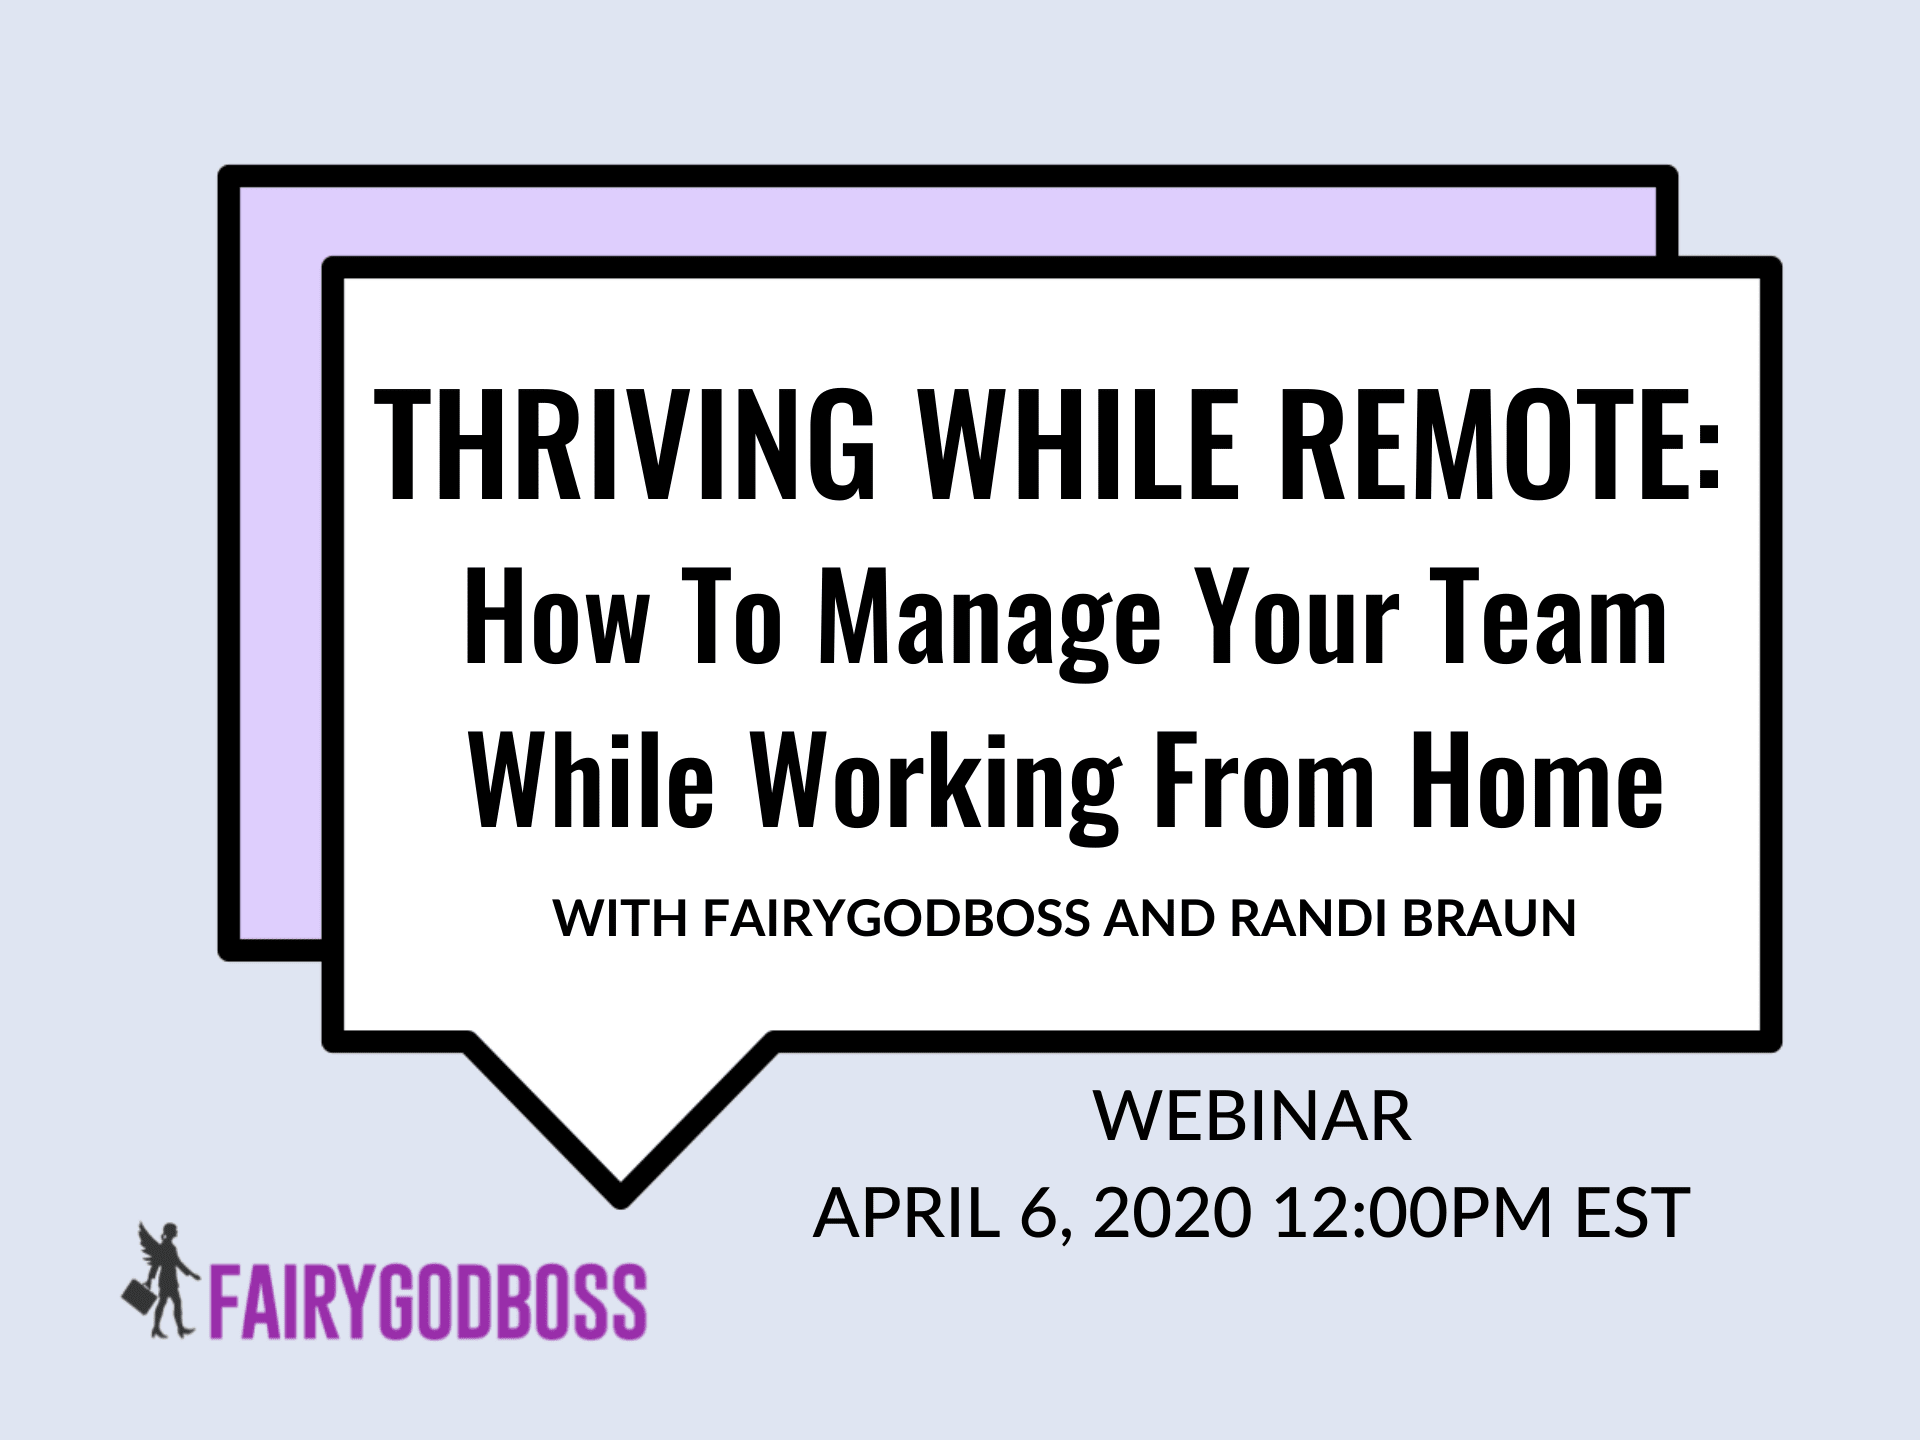 Thriving While Remote: How to Manage Your Team While Working From Home